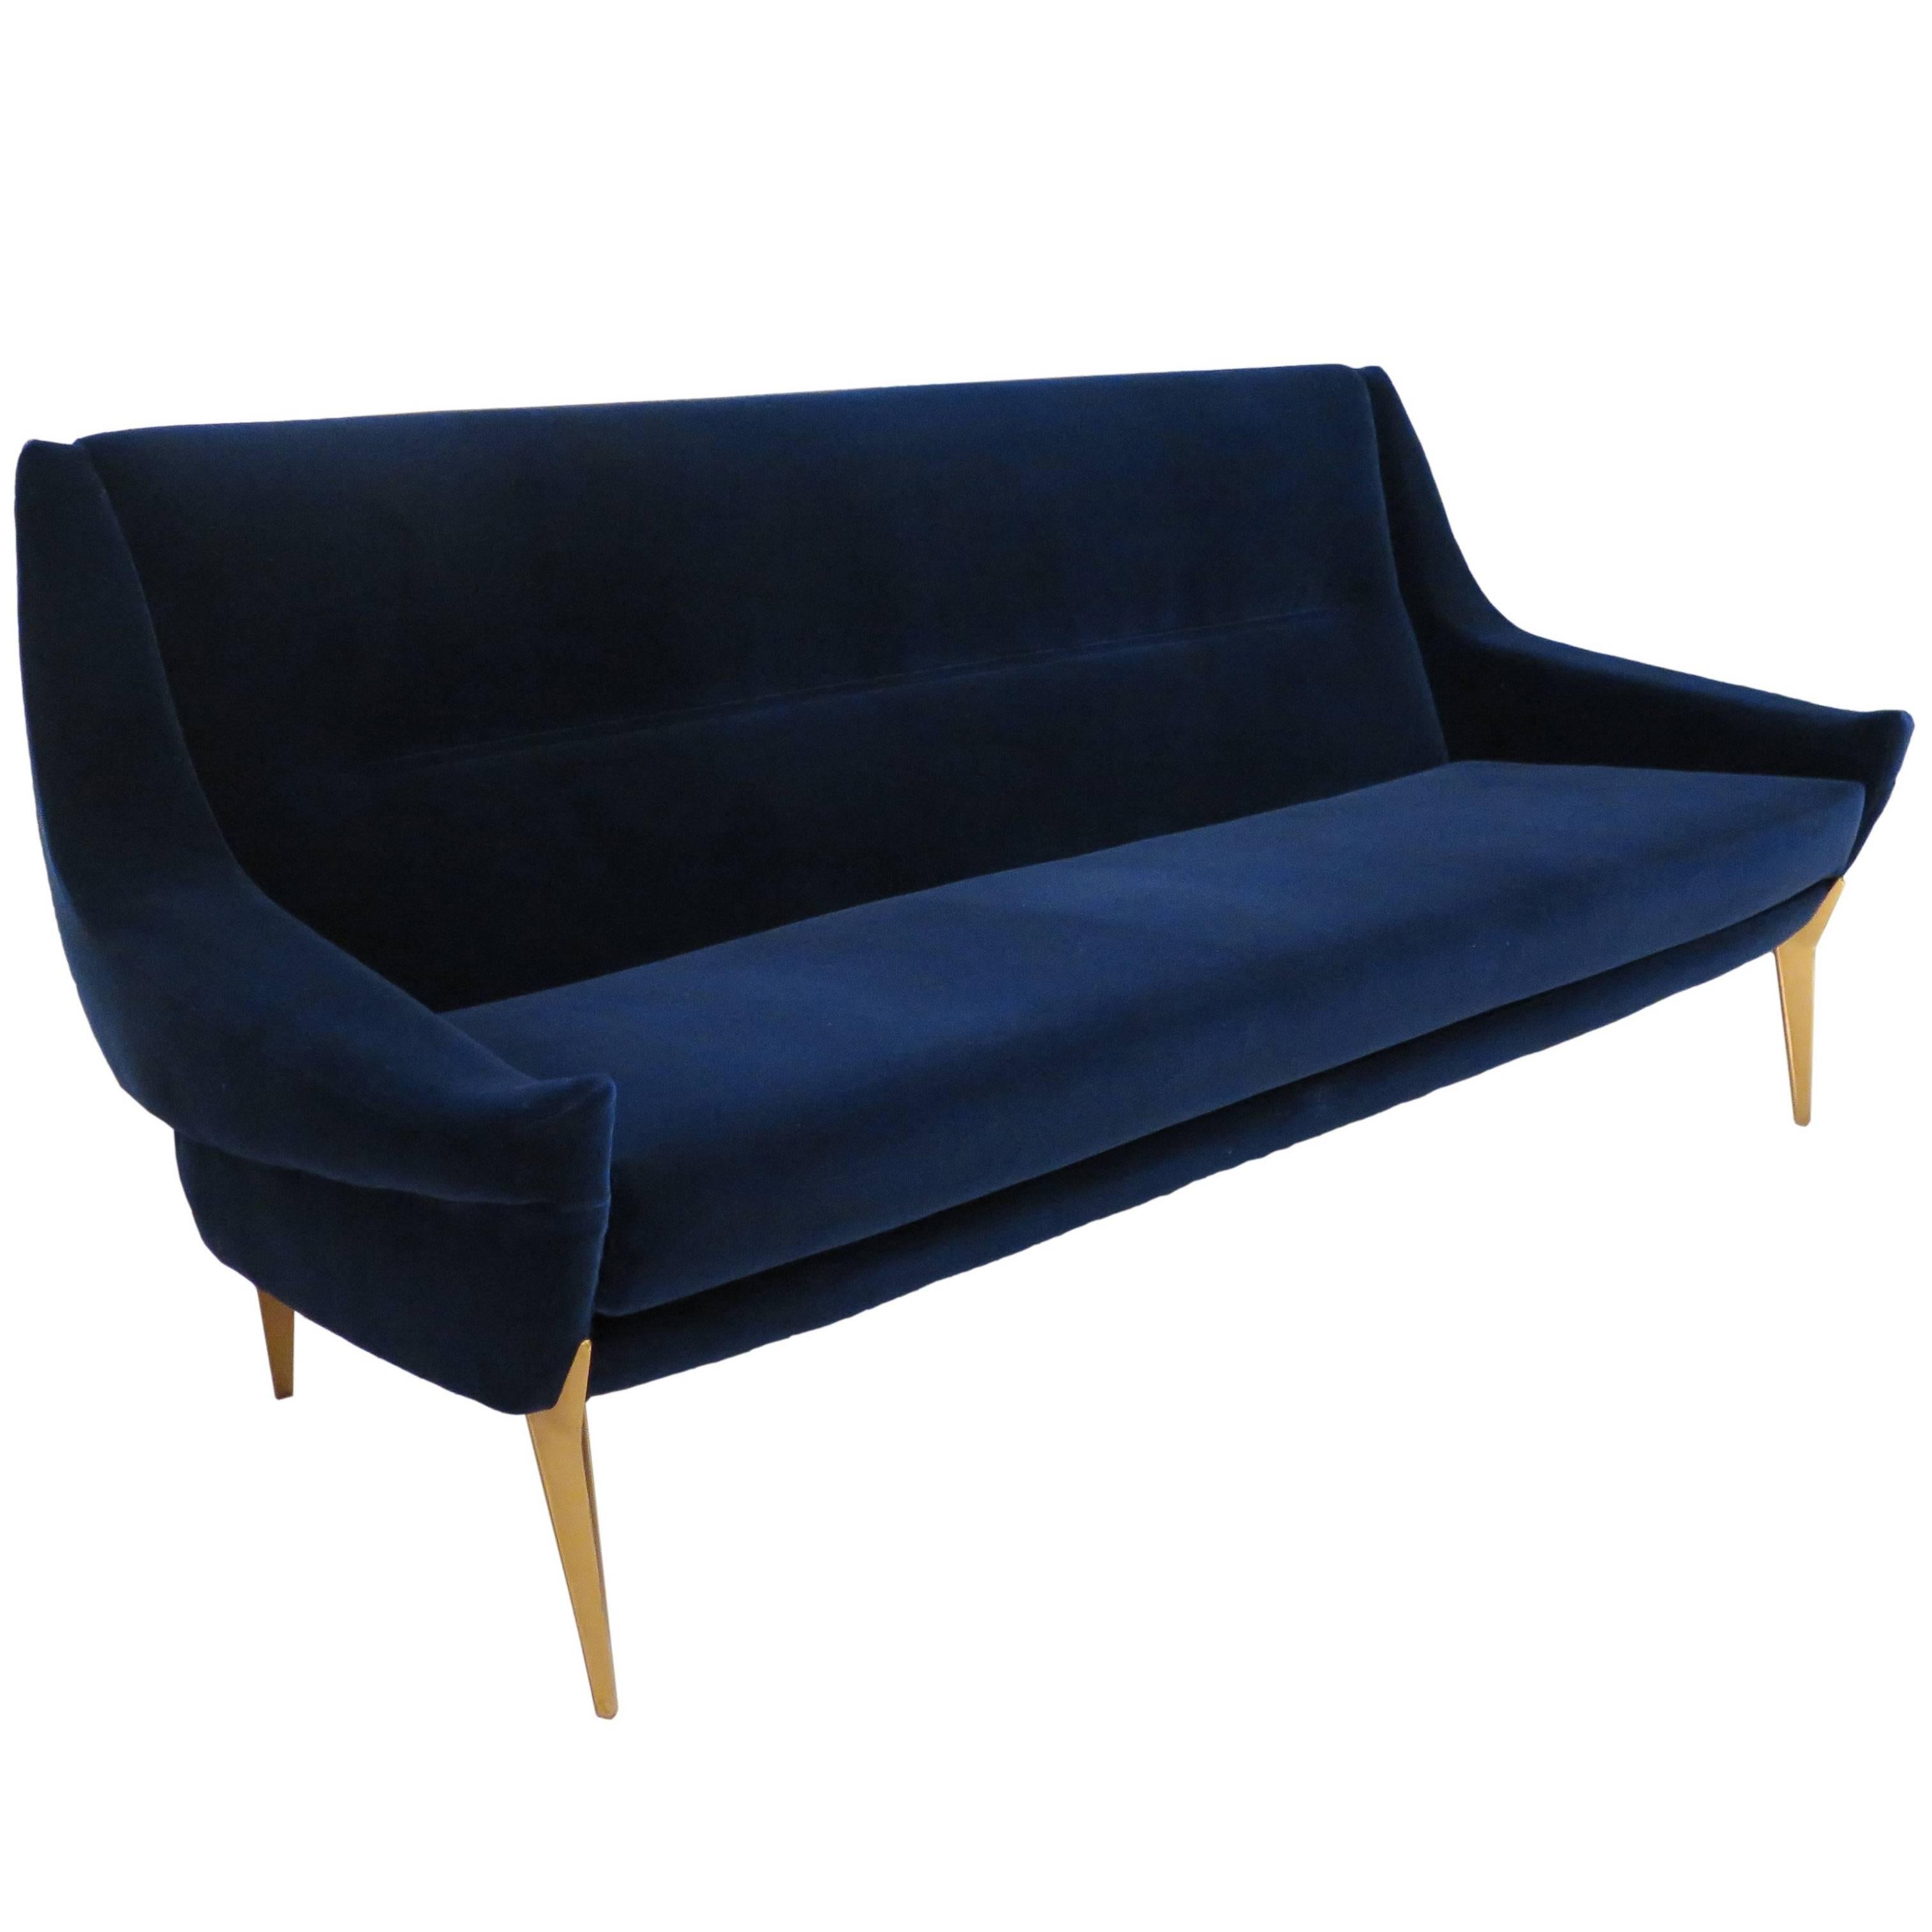 Rare 1950s Sofa by Charles Ramos For Sale